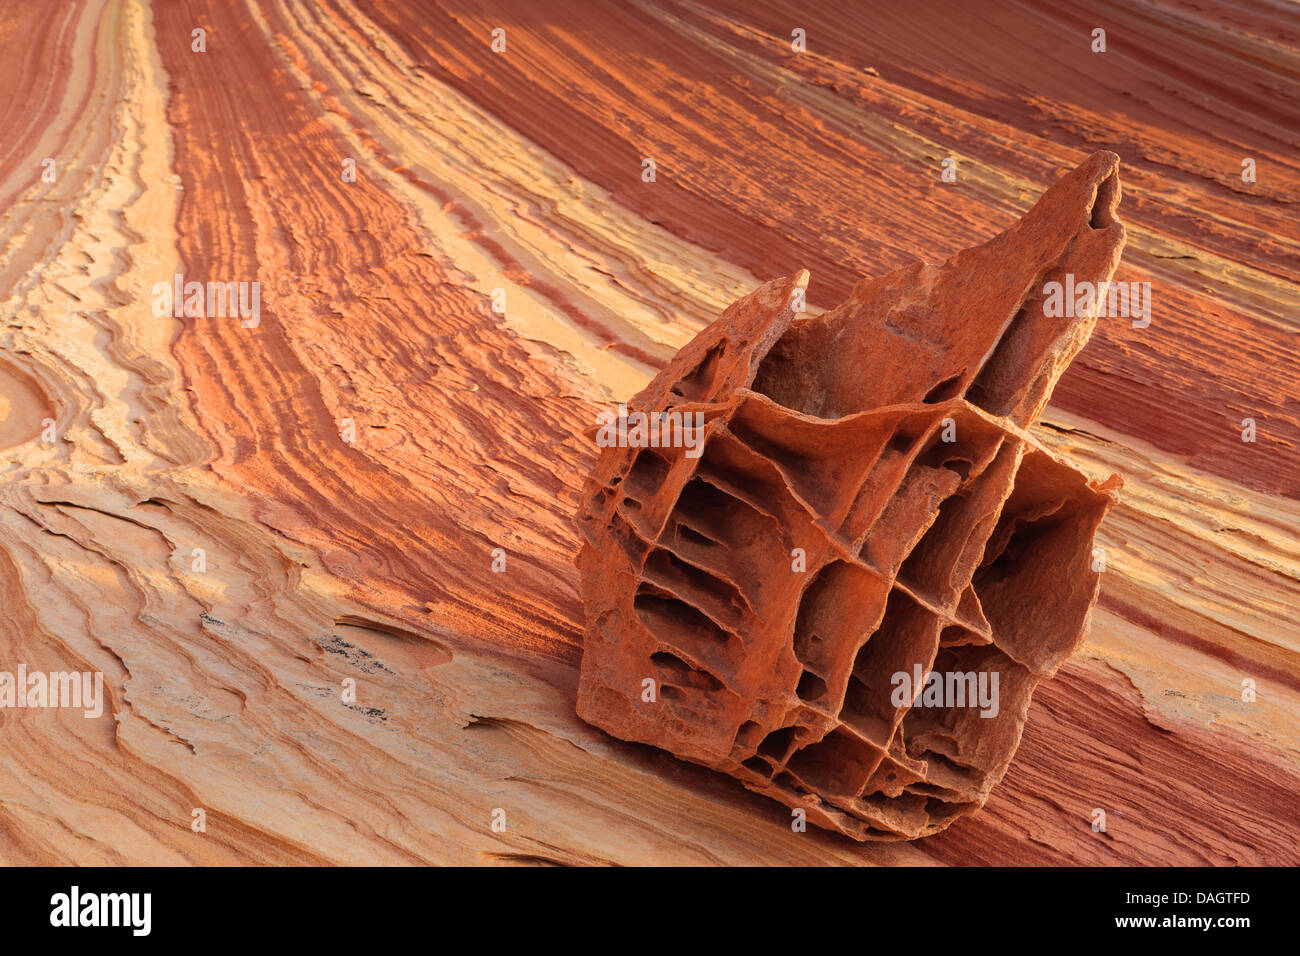 Rock formations in the North Coyote Buttes, part of the Vermilion Cliffs National Monument. Also known as The Boneyard Stock Photo